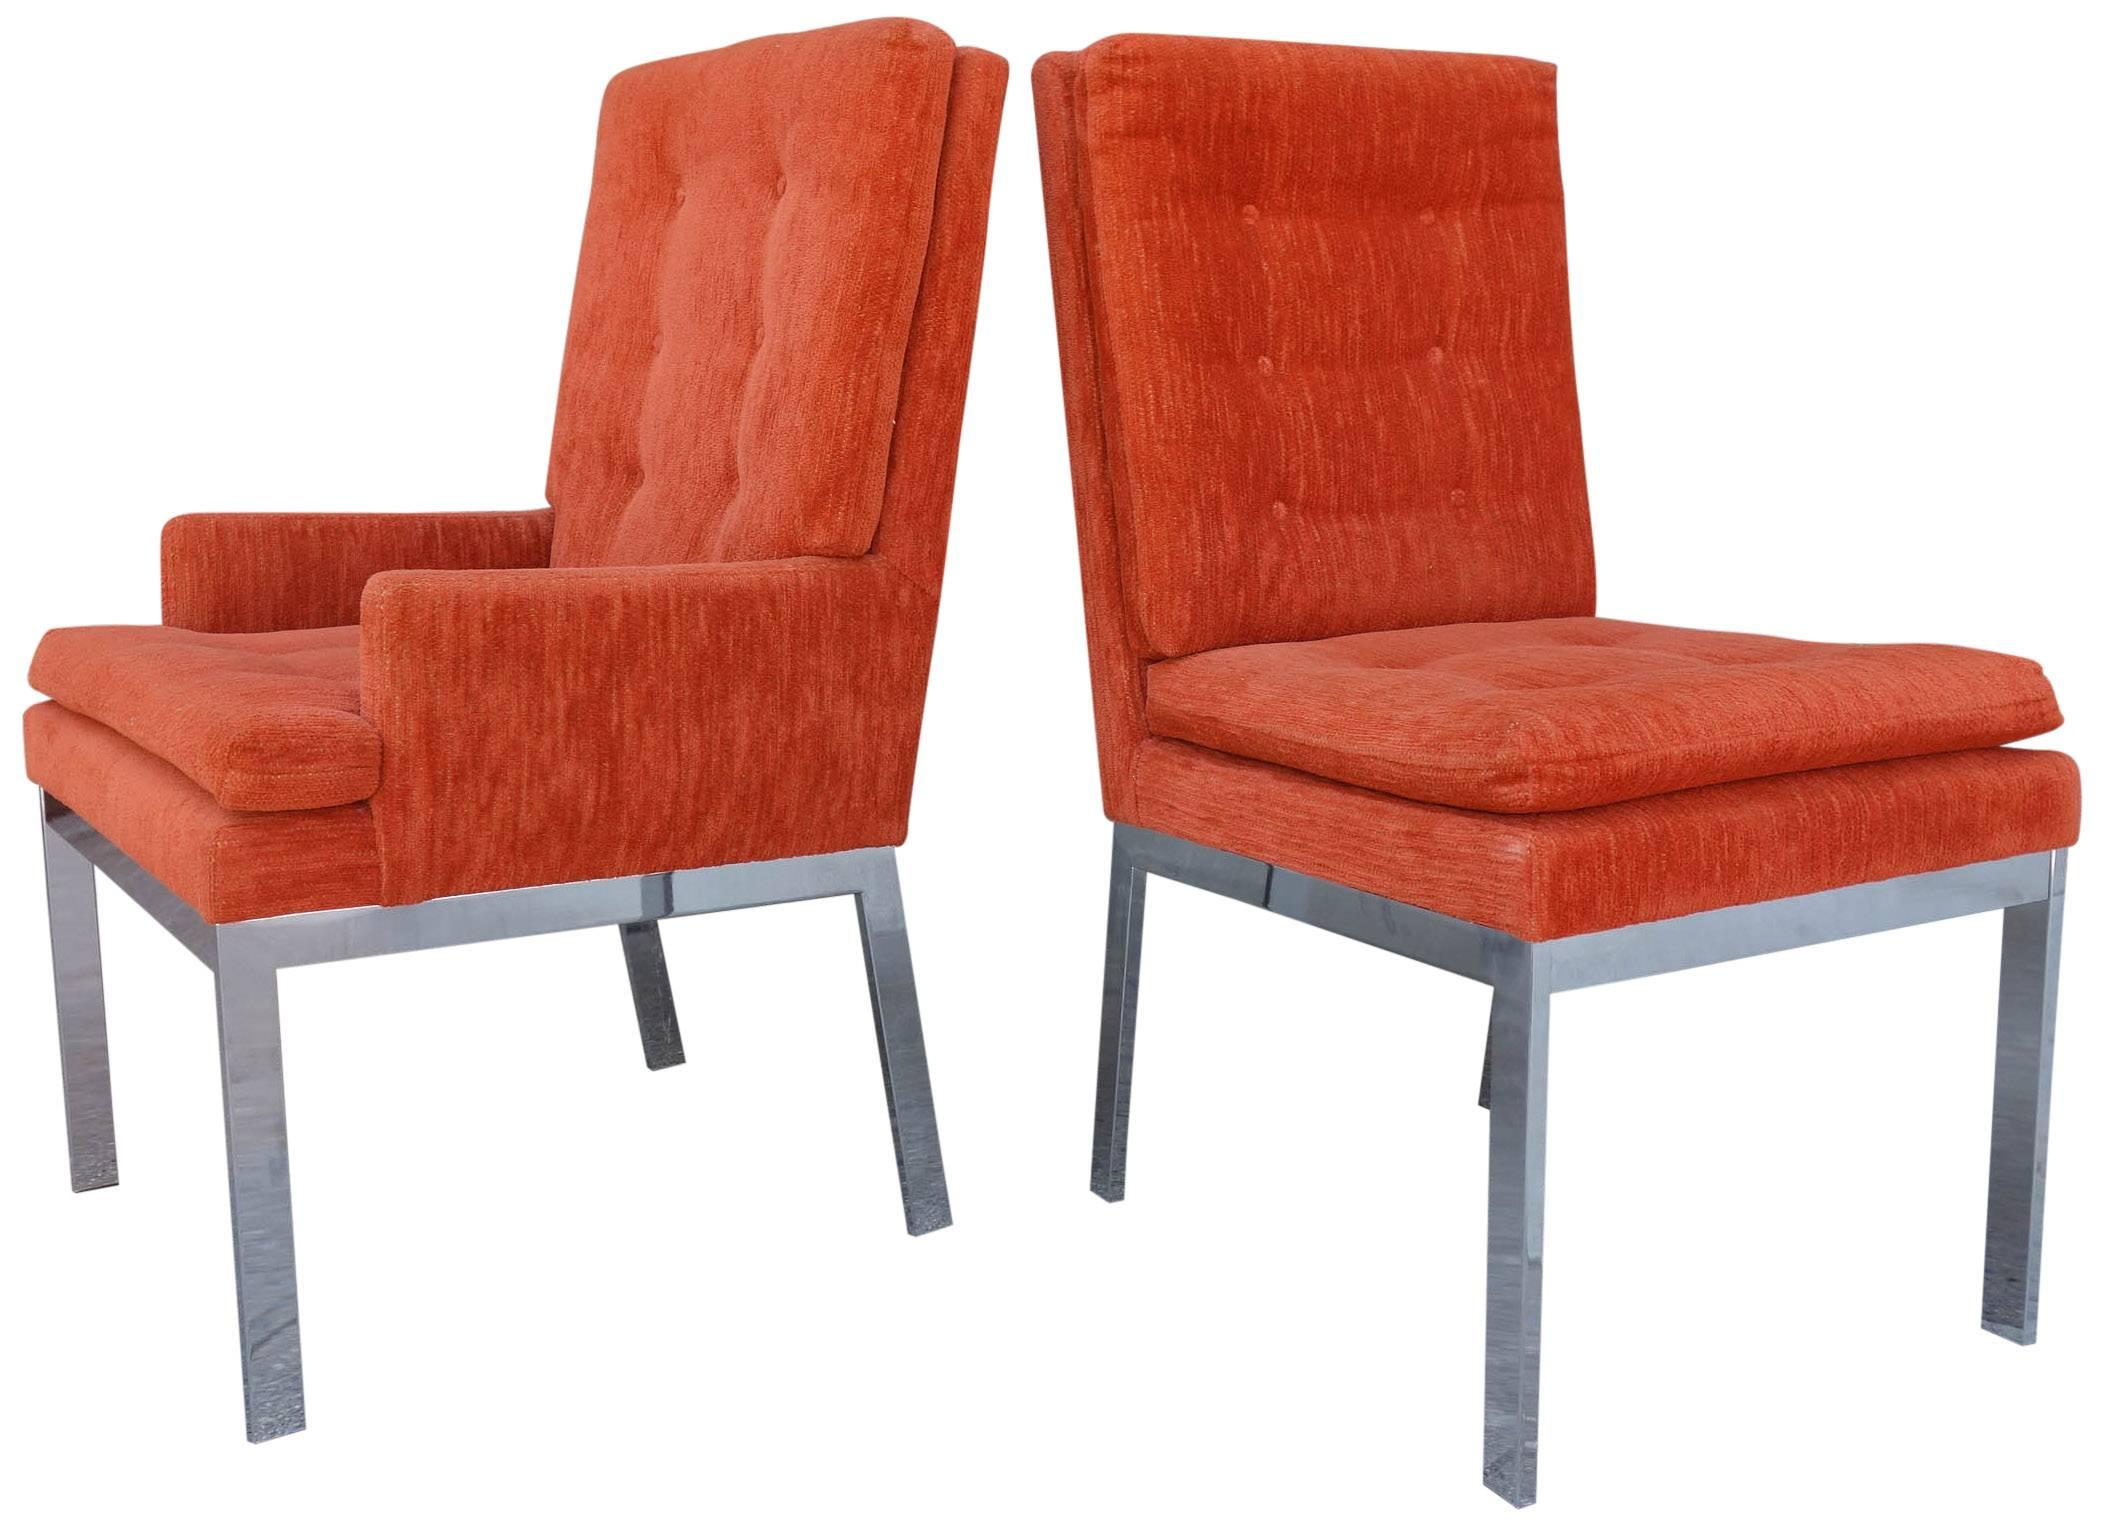 Mid-Century Milo Baughman dining chairs for DIA. Six chrome frame dining chairs with burnt orange tufted upholstery. Original upholstery in wonderful condition. DIA Labels on underside and factory care stickers still applied to frame. 

Armchairs